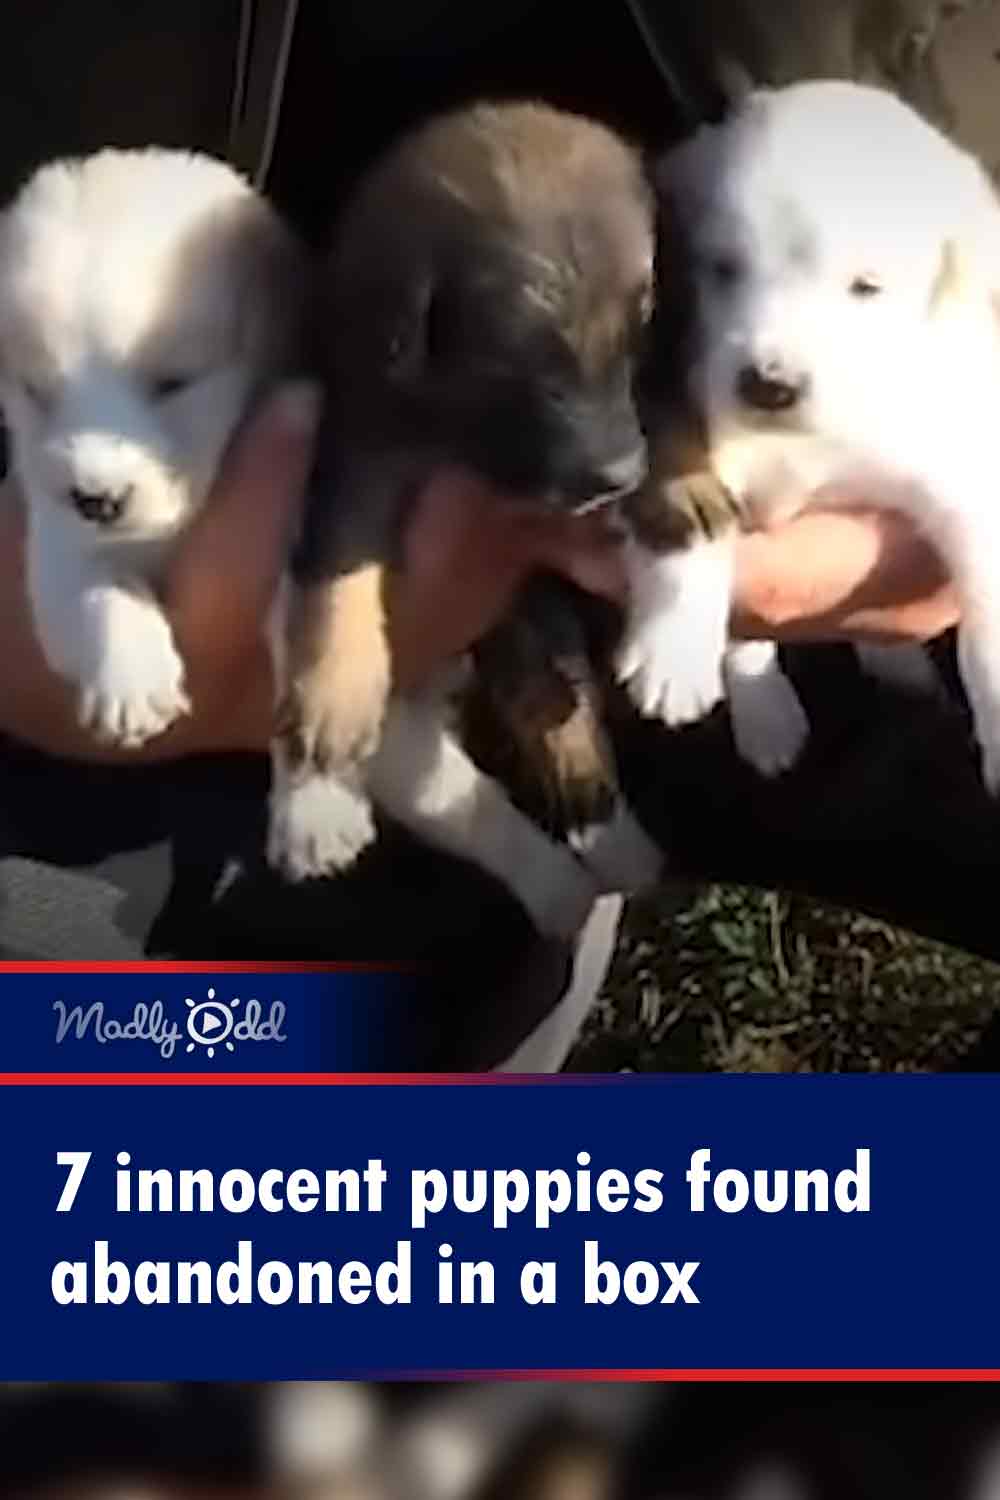 7 innocent puppies found abandoned in a box